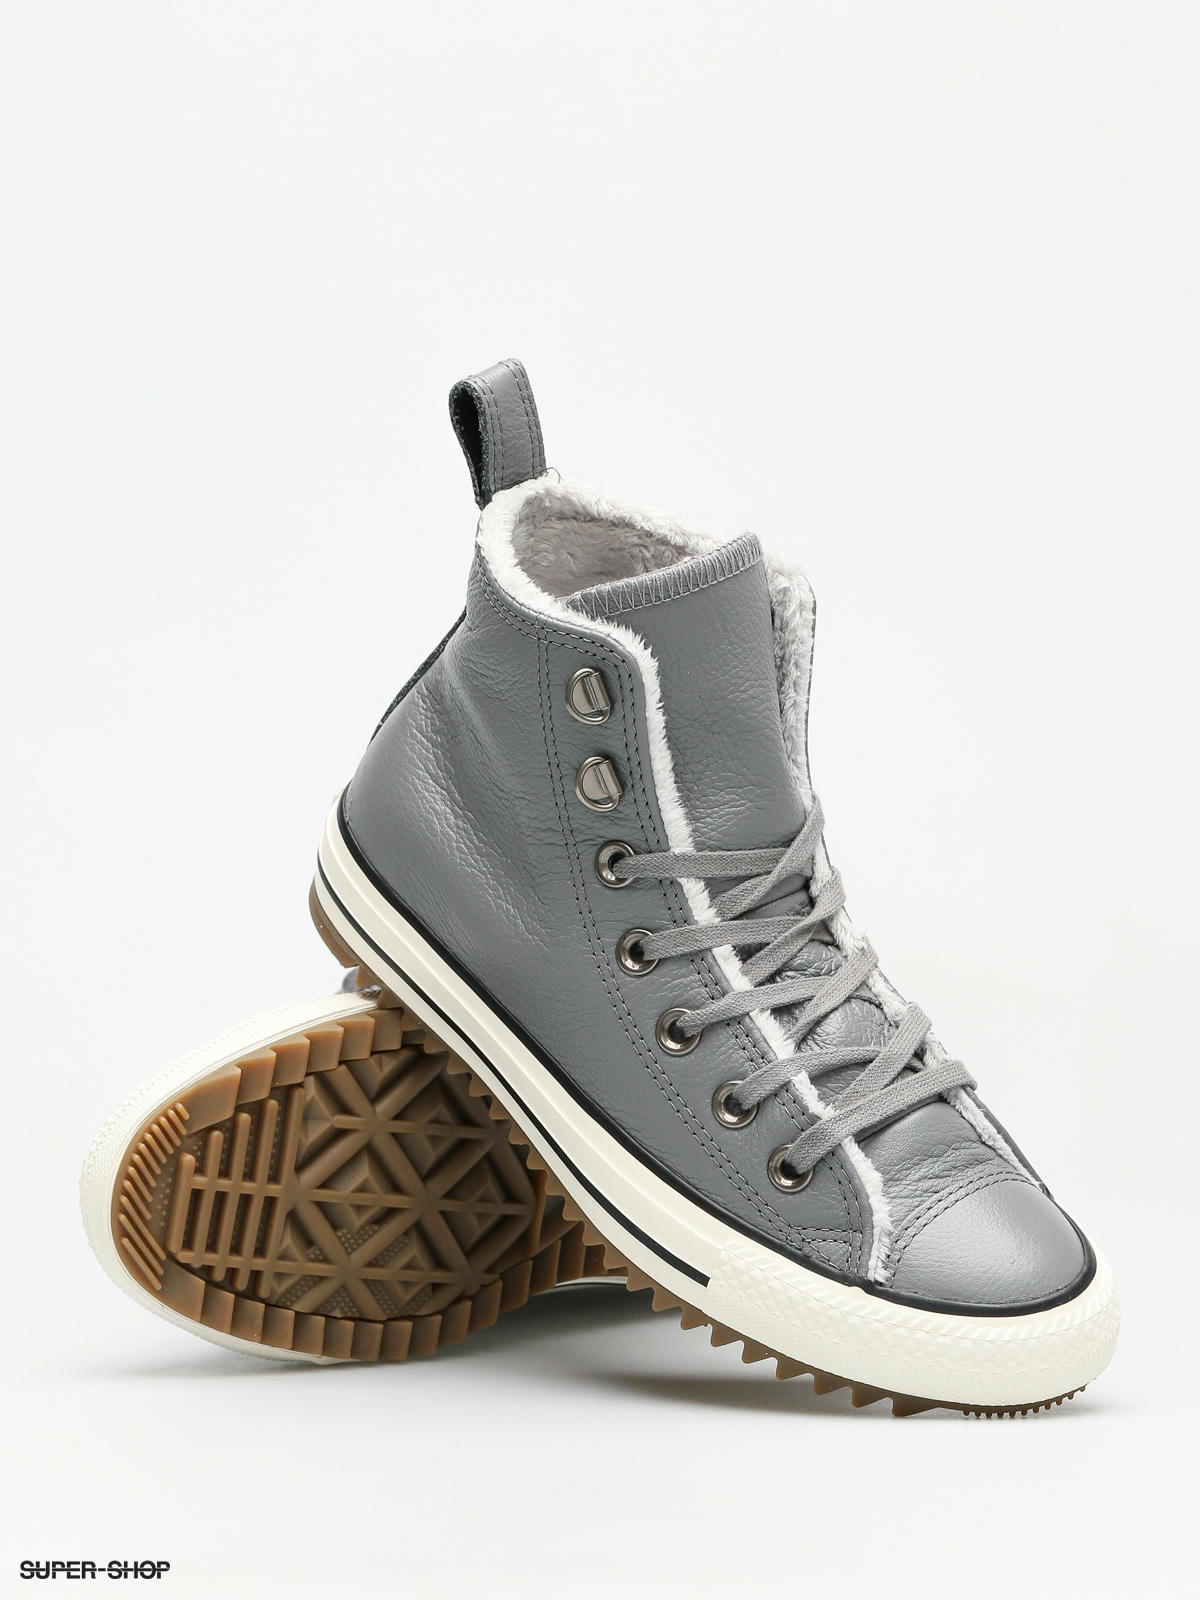 converse winter shoes womens